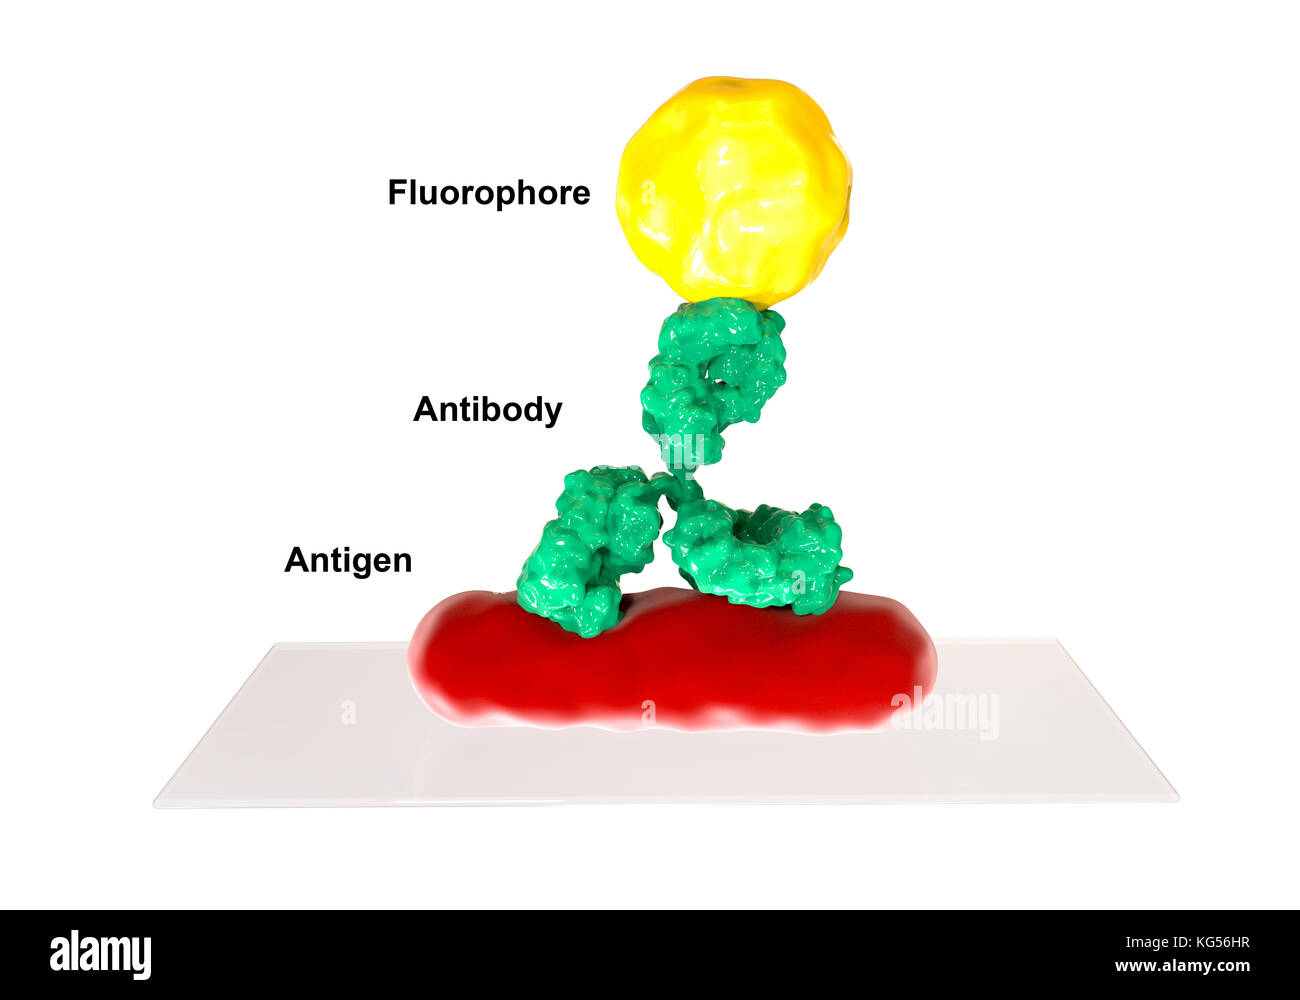 Mechanism of direct immunofluorescence test, computer illustration. Immunofluorescence is a cell imaging technique based on the use of antibodies to label a specific target antigen (bacteria, cancer cells, other) with a fluorescent dye (also called fluorophore or fluorochrome). The fluorescent dye allows visualization of the antigen distribution in the sample under a fluorescent microscope. Direct immunofluorescence test uses a single antibody directed against the antigen that is the target of interest. This antibody is directly conjugated to a fluorescent dye. Stock Photo